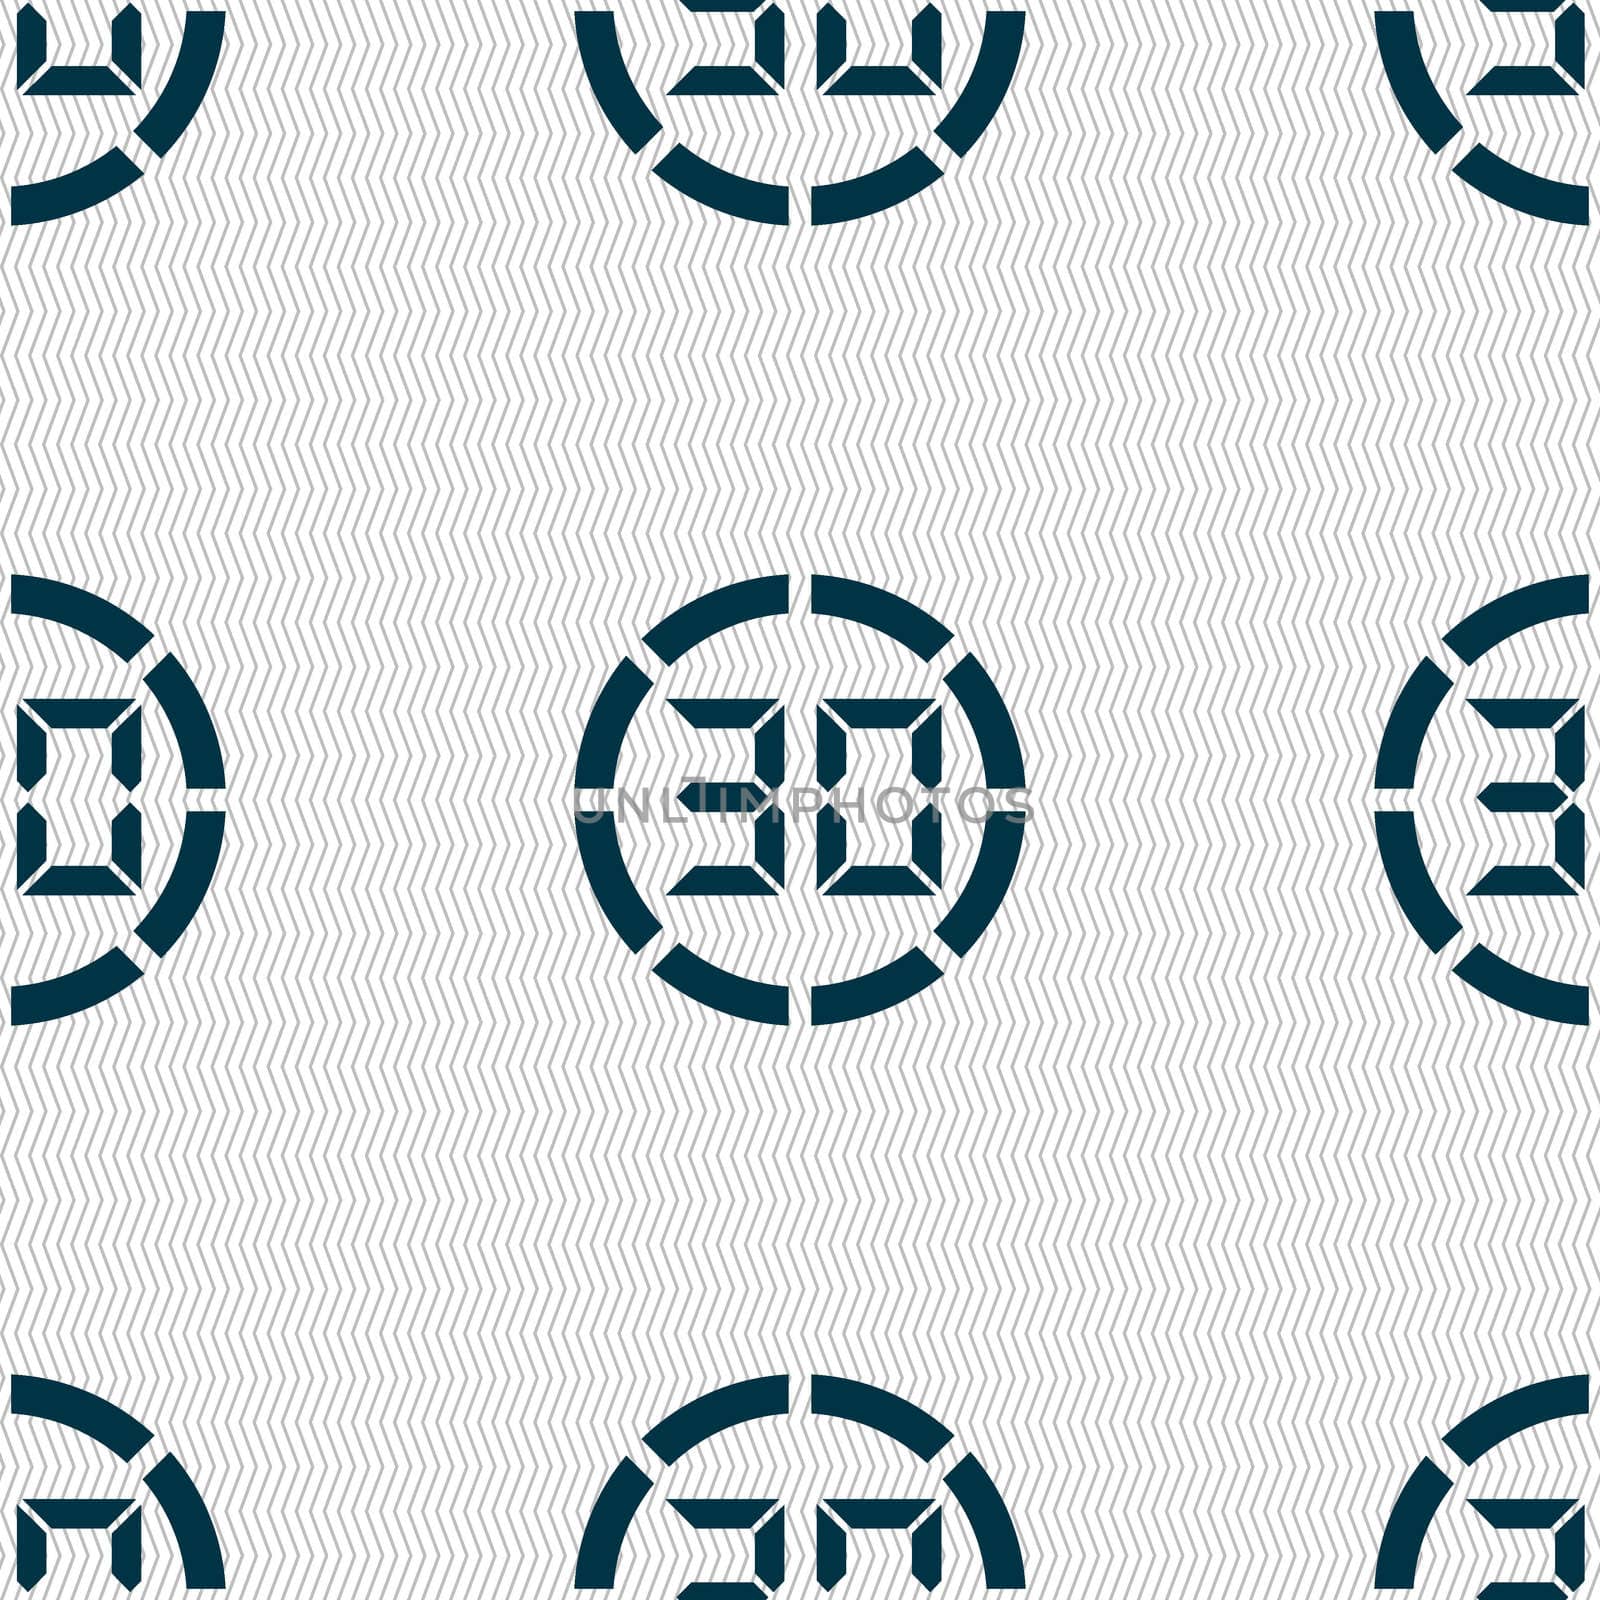 30 second stopwatch icon sign. Seamless abstract background with geometric shapes. illustration